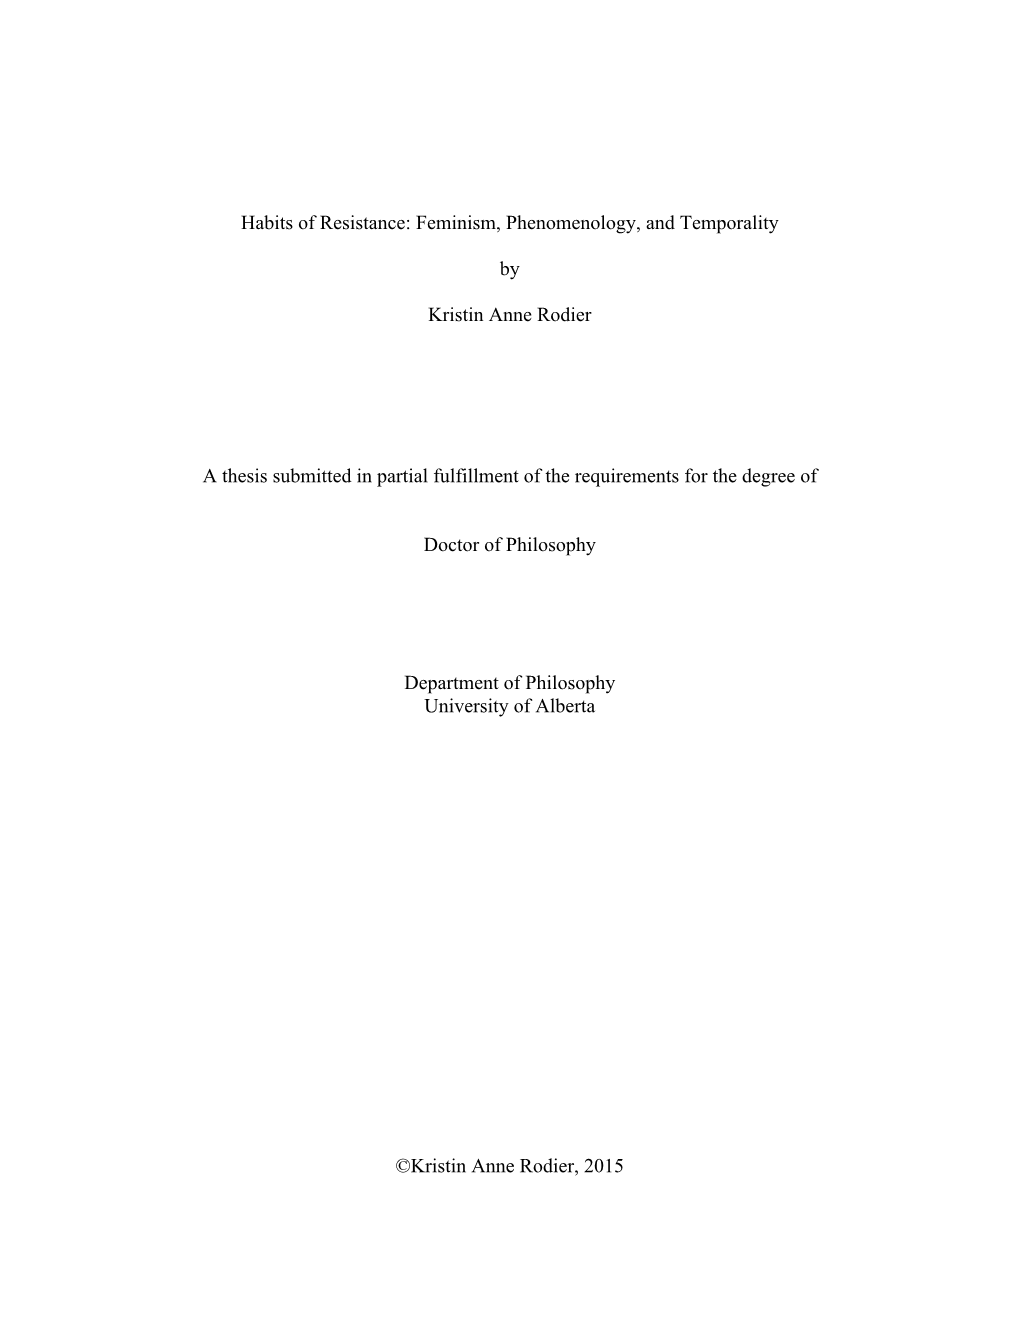 Feminism, Phenomenology, and Temporality by Kristin Anne